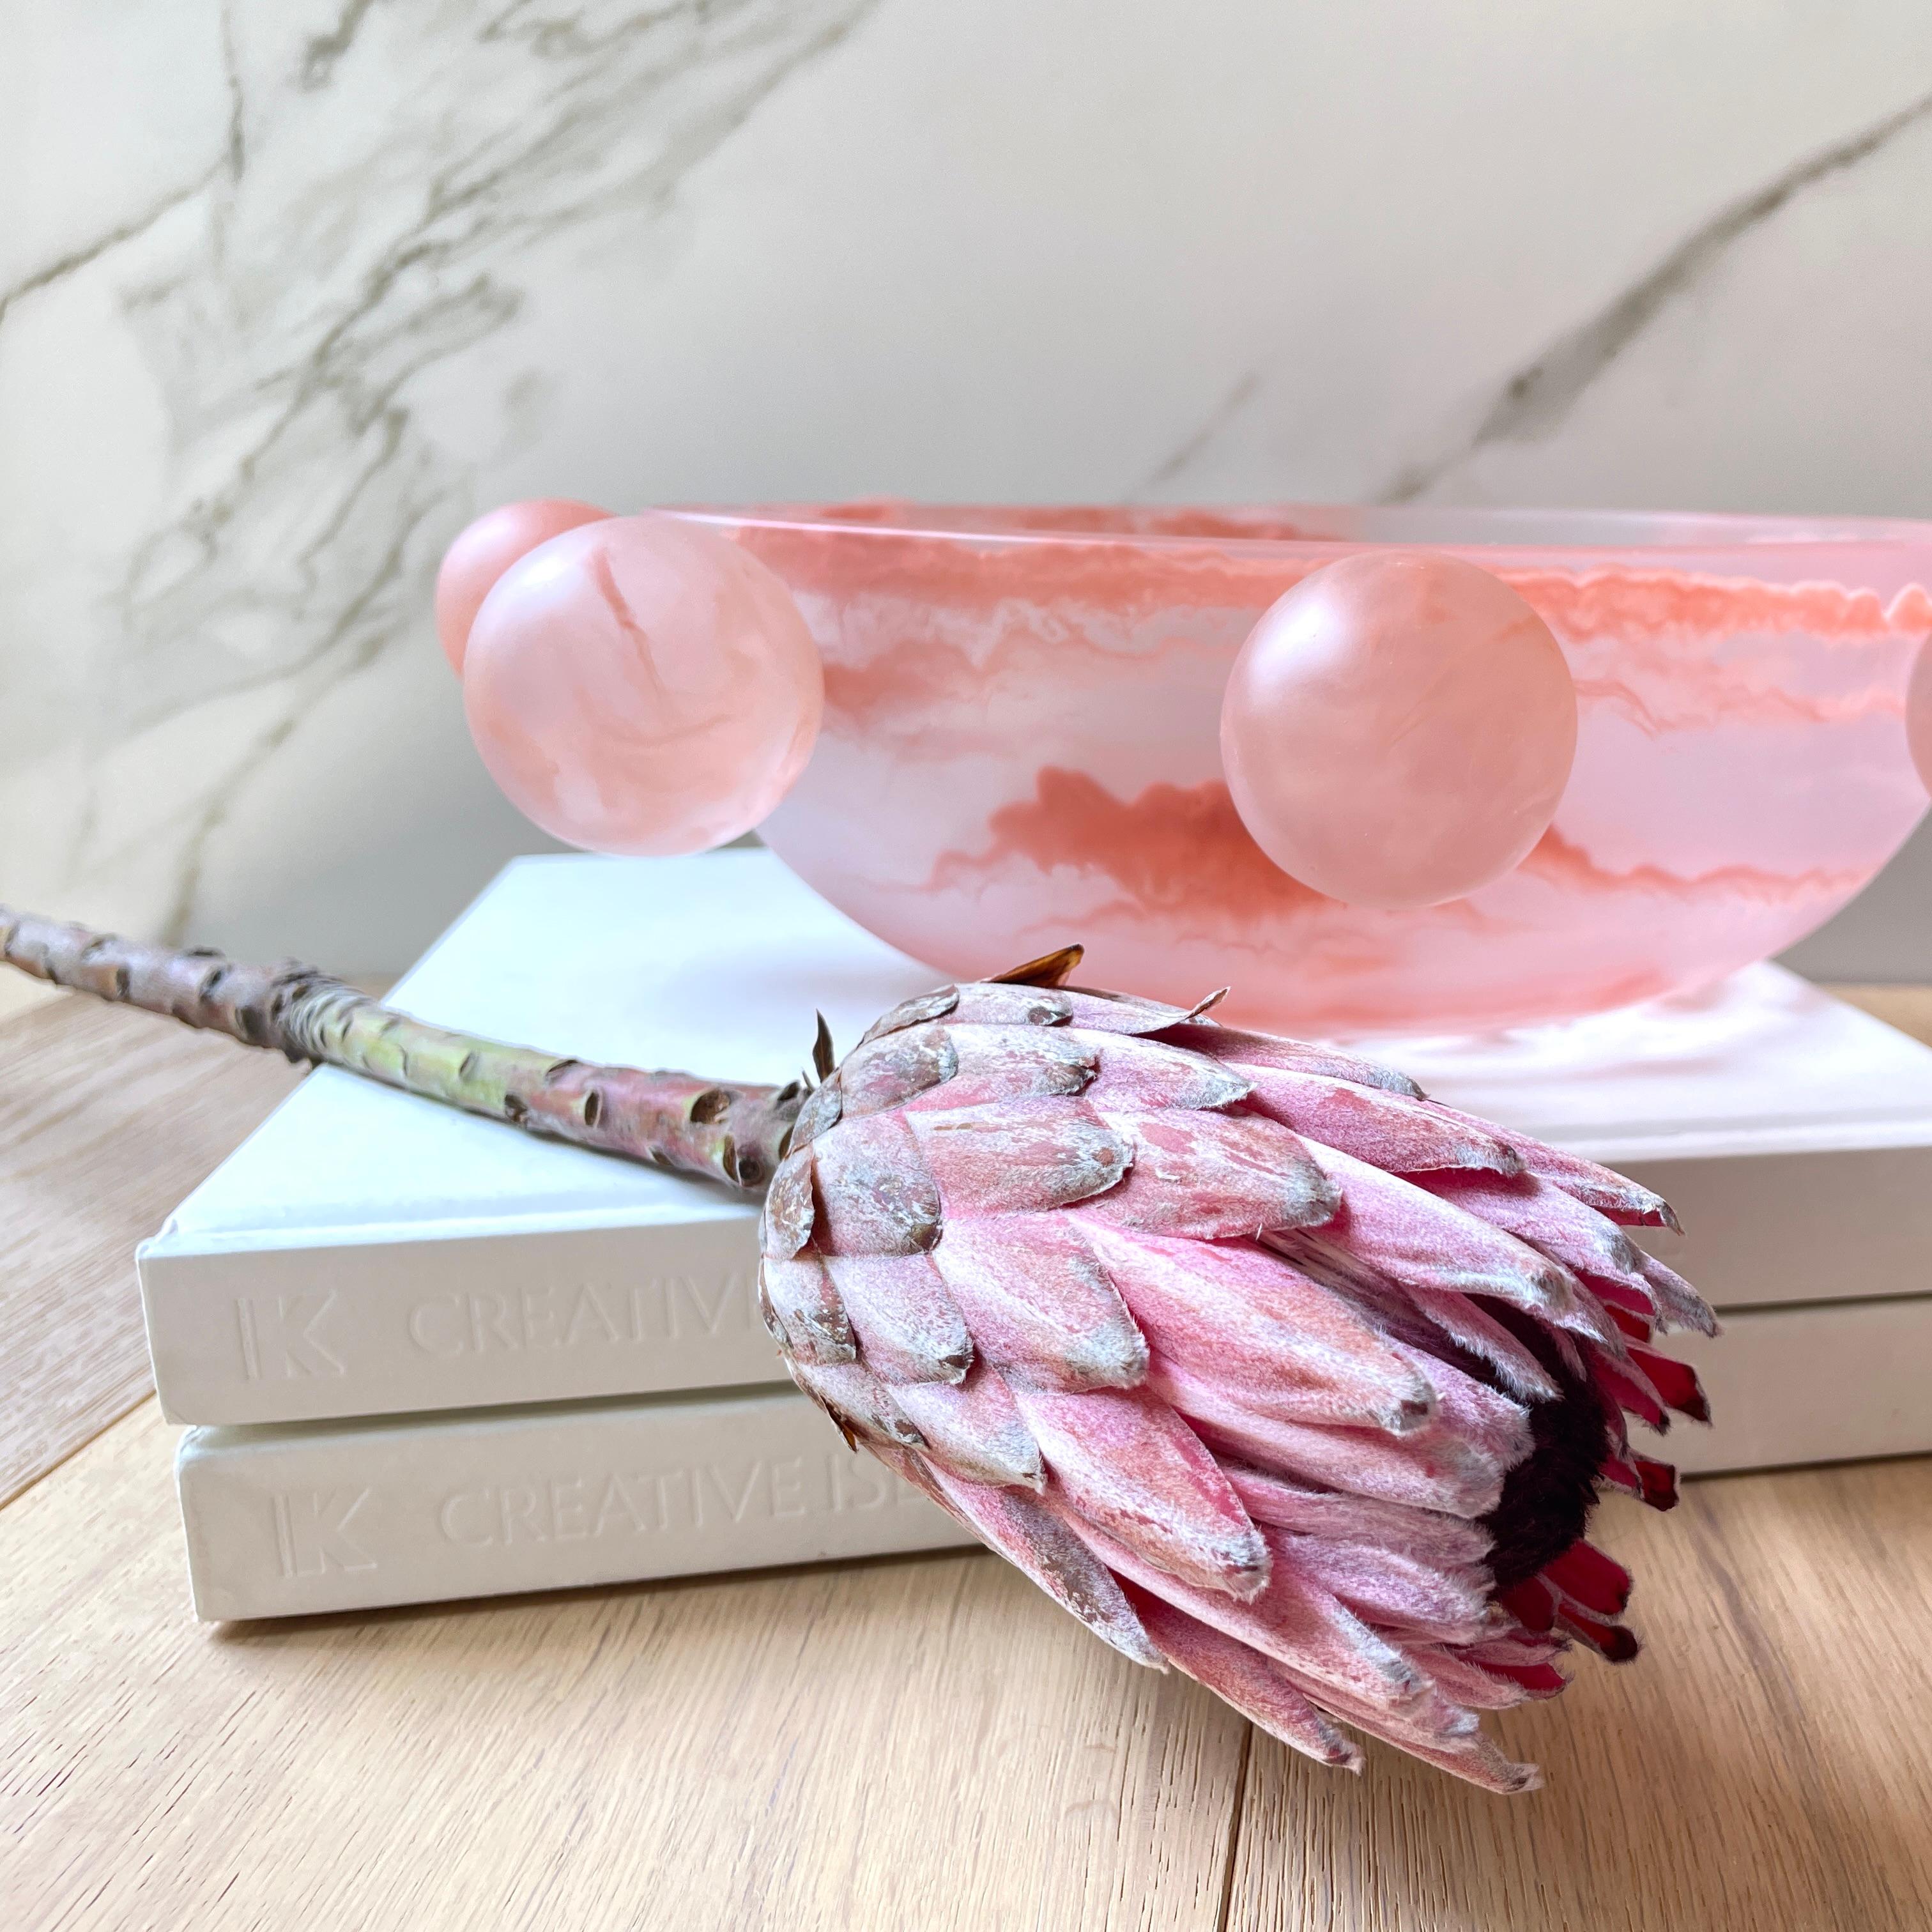 Our Bubble Bowl is handmade in marbled light pink resin. Its modern, fun and unique design makes it a statement piece and can be used as decor or as a fruit platter.

Designed by Paola Valle and manufactured in Mexico City by extraordinary artisans.